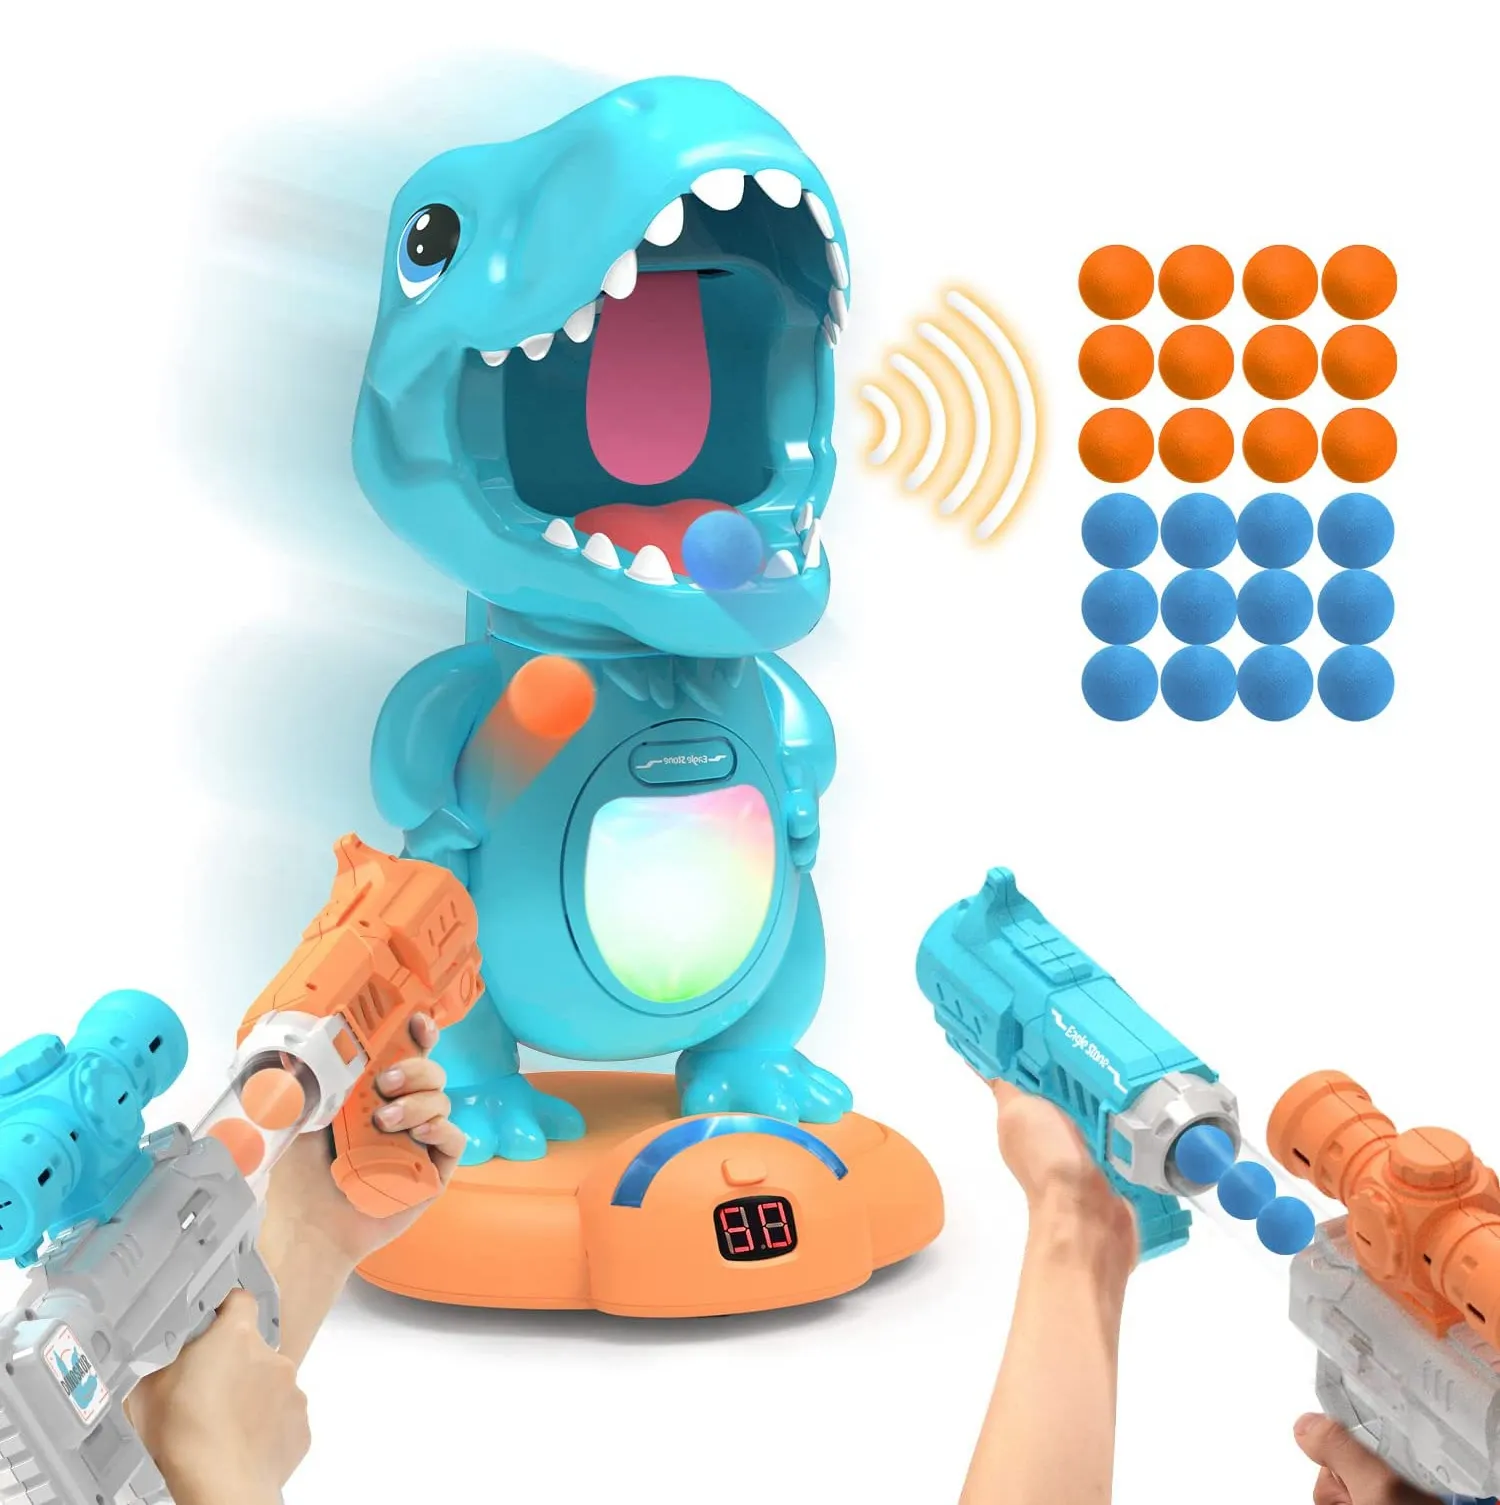 Eagle Stone 8808-7B Moving Dinosaur Toys Electronic Target Shooting Game Toys with 2 Air Pump Guns for Kids Boys